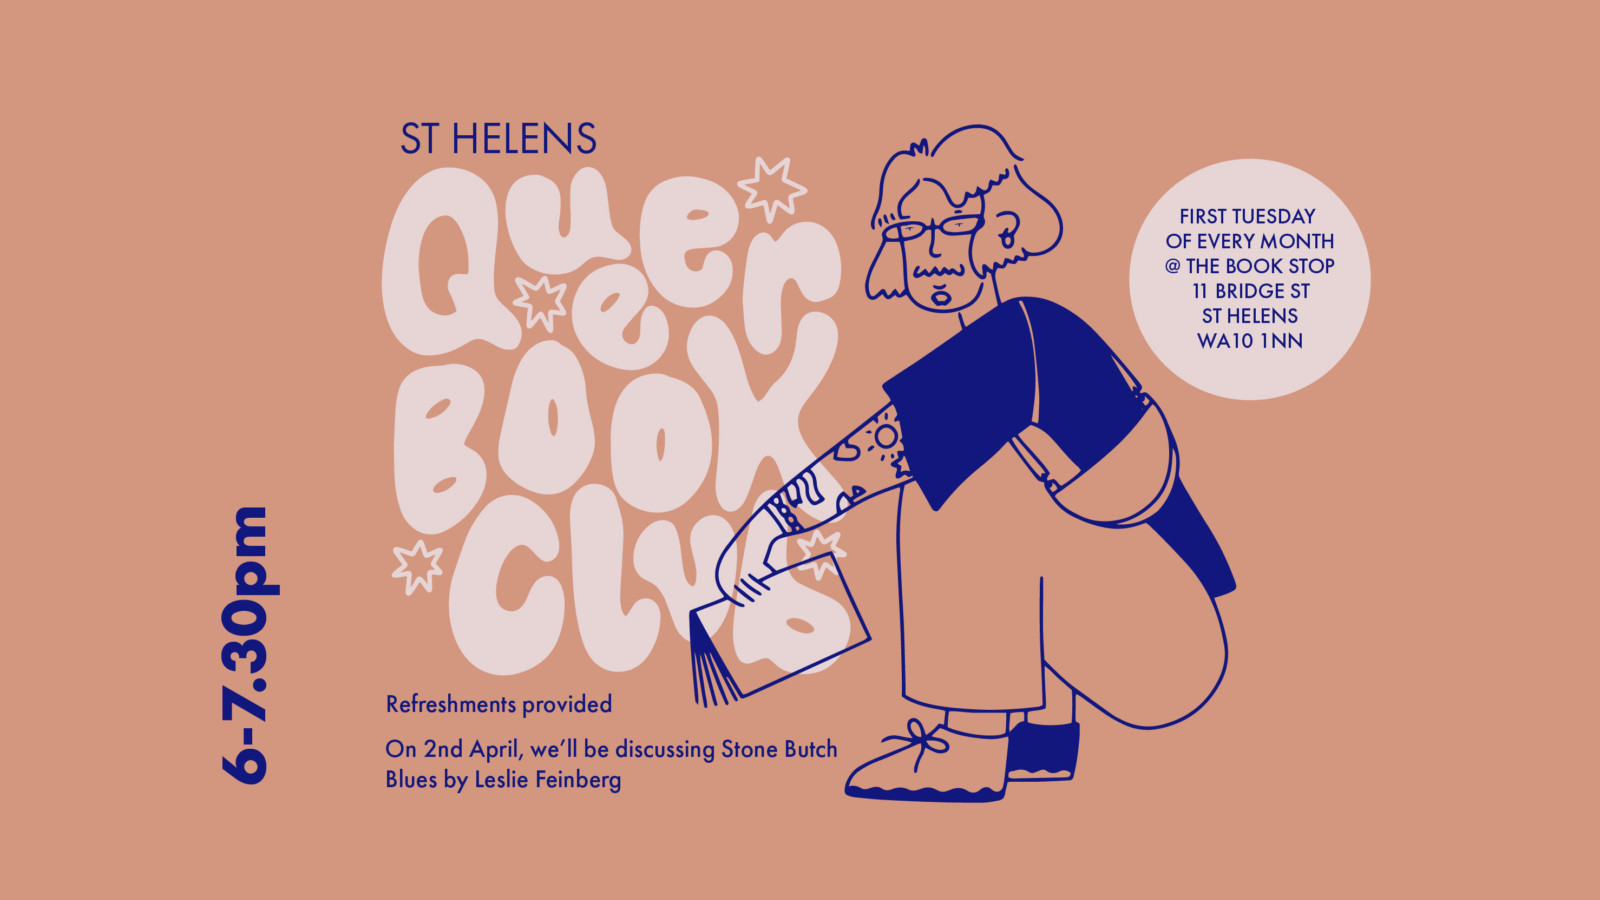 A peach background with illustrated text reading 'Queer Book Club' next to an illustration of a person with tattoos holding a book whilst crouching down.